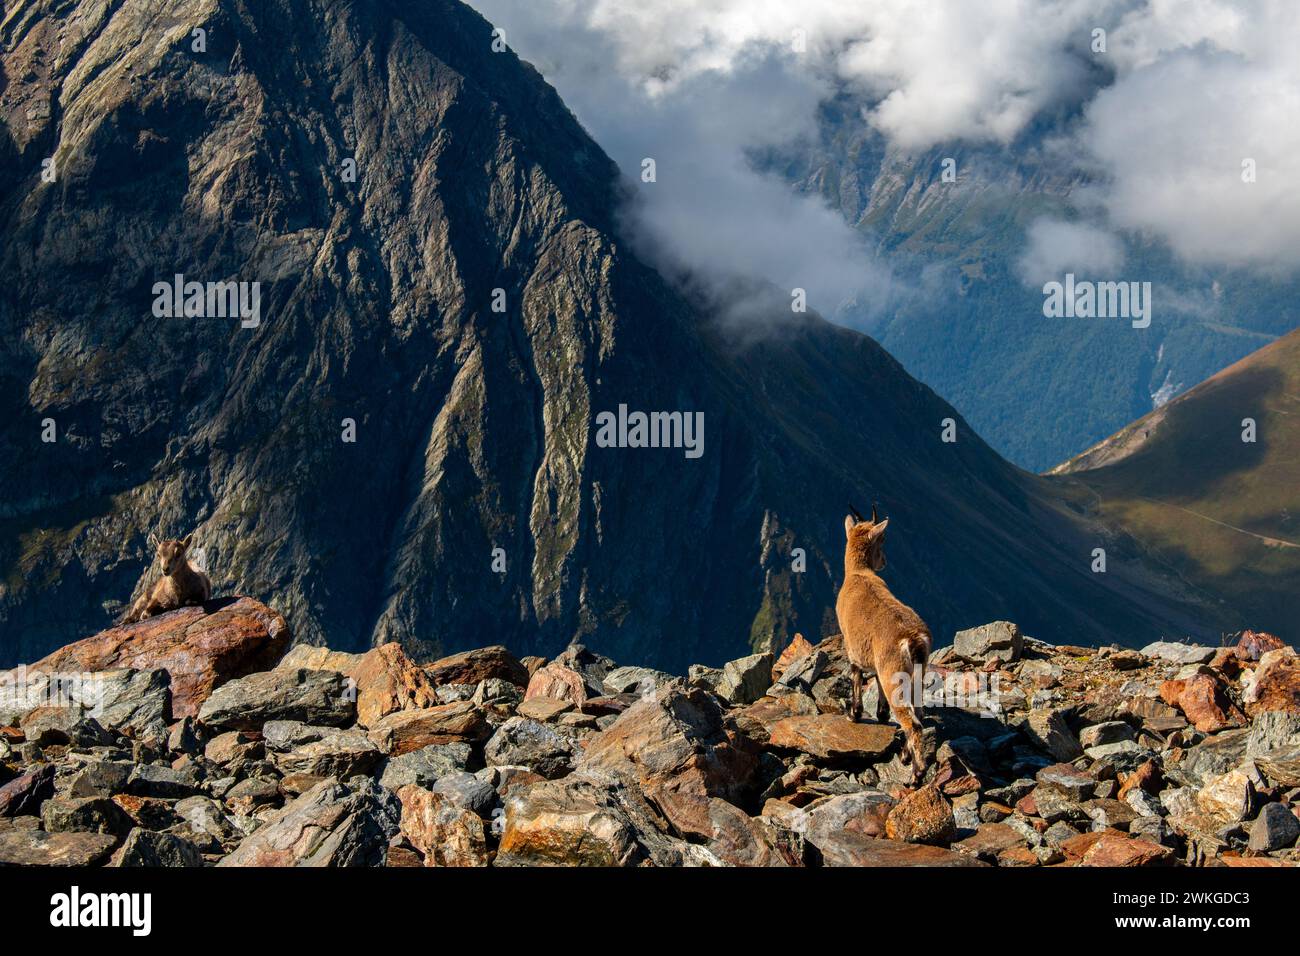 A baby and an adult goats in French Alps on the hiking trail between Nid d'Aigle and Refuge de Tete Rousse, Massif du Mont Blanc, September, France Stock Photo